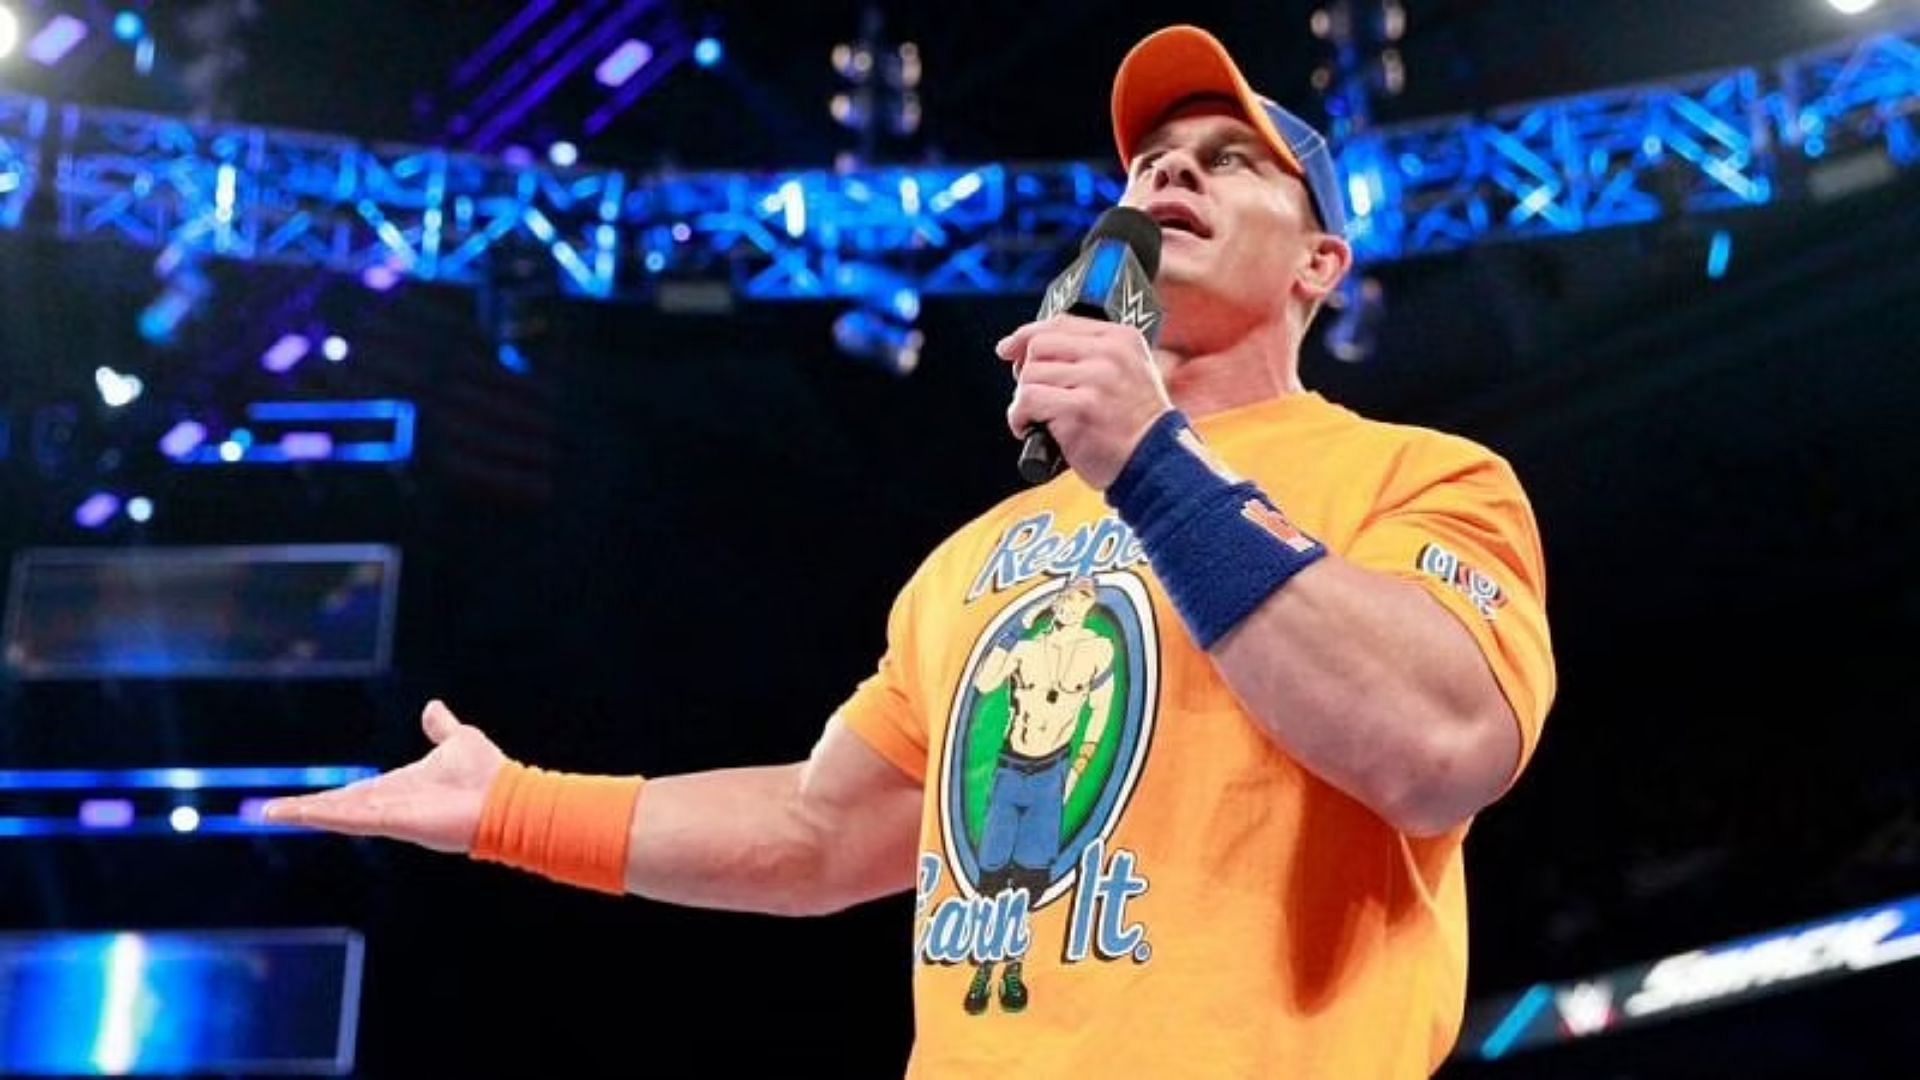 John Cena has been one of the most polarizing figures in wrestling history